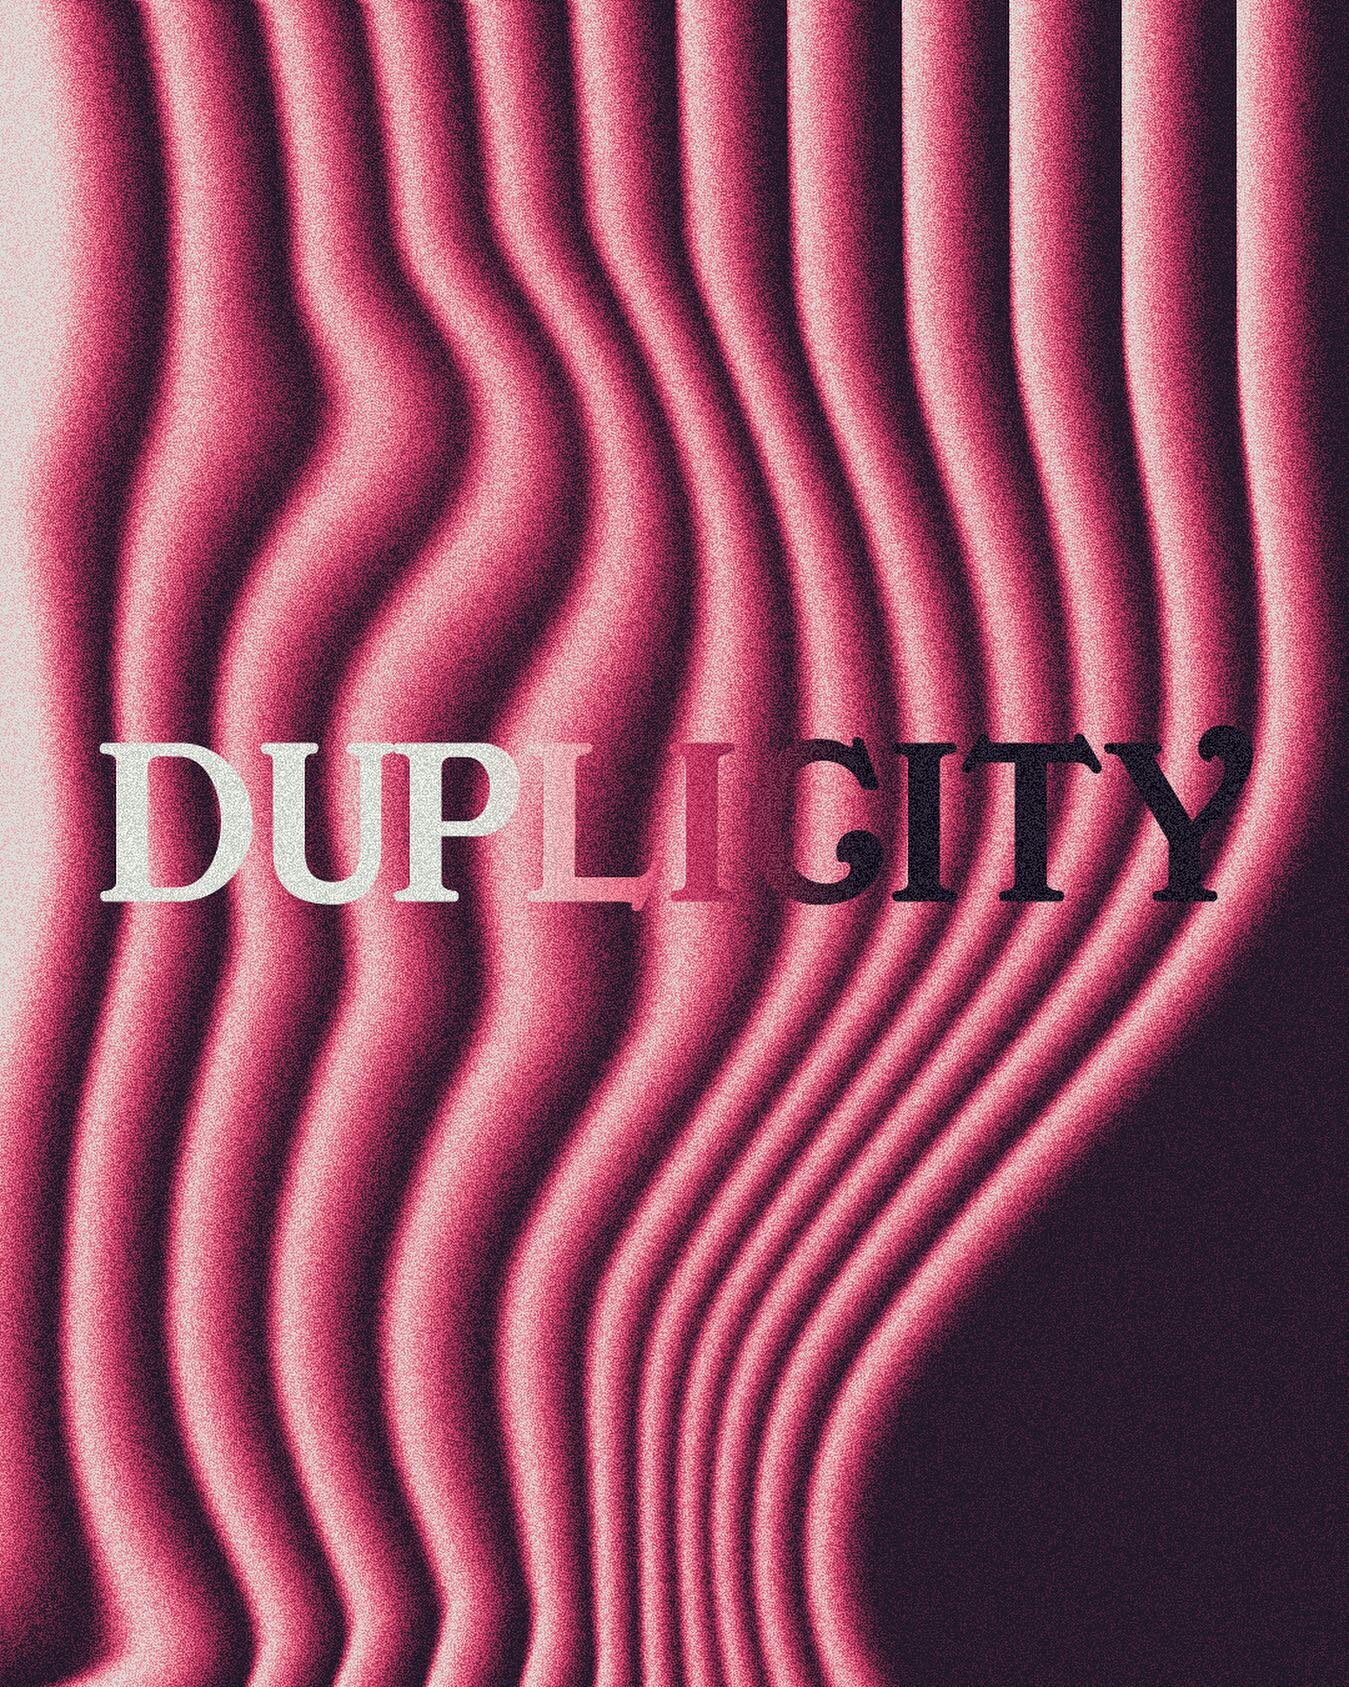 Duplicity: a formal word that refers to dishonest behavior meant to trick or deceive someone.
#wordoftheday #design #designer #graphicdesigners #typography #artdirector #photoshop #gradient